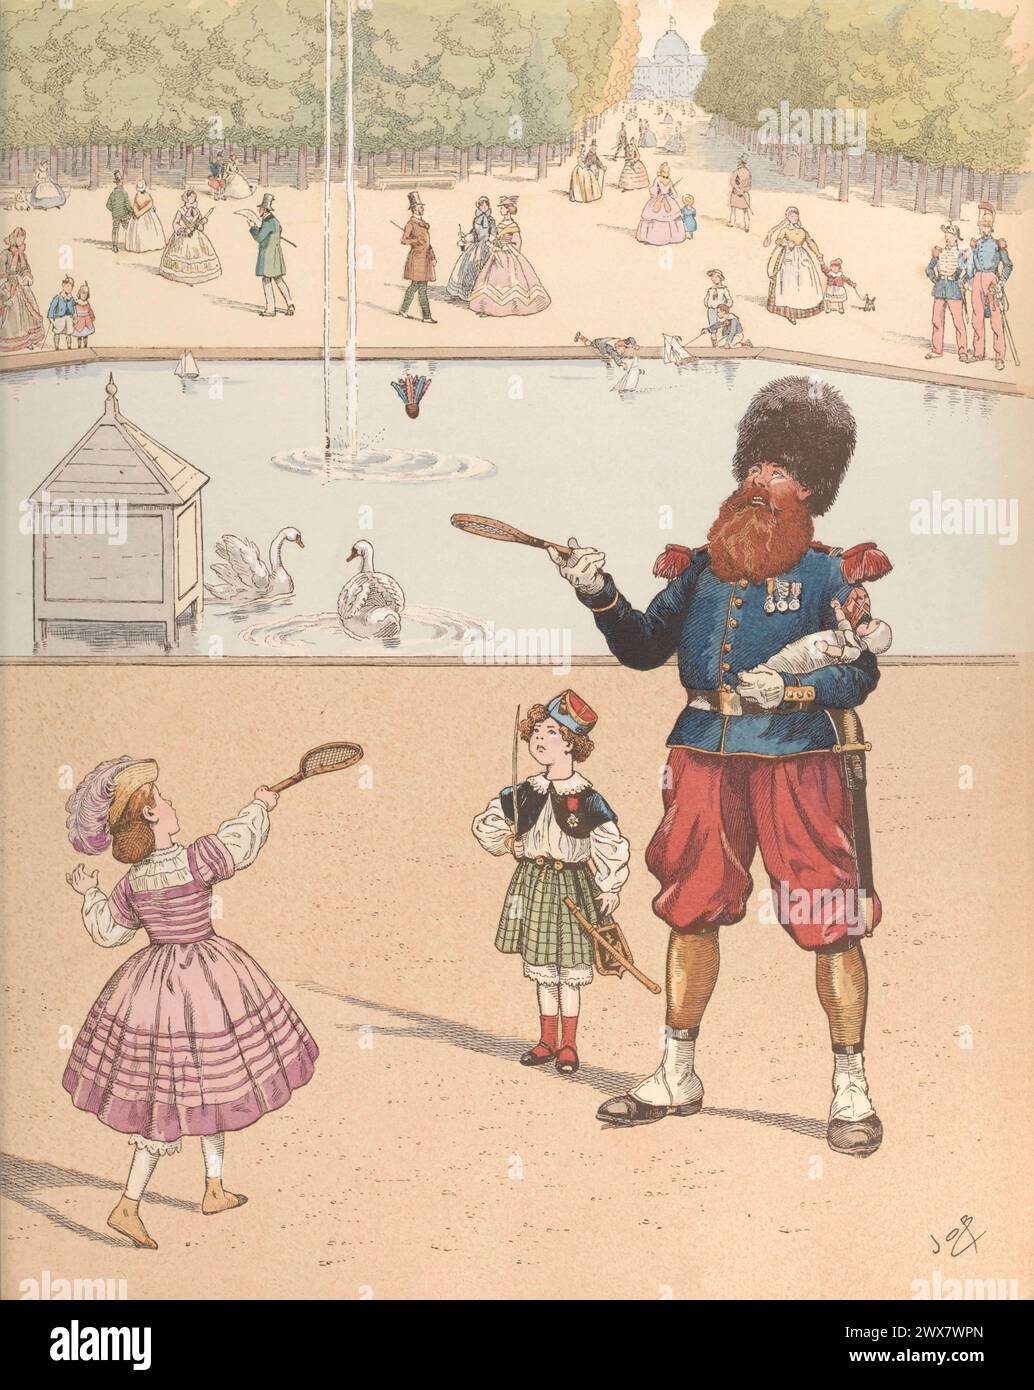 French sapper looking after children in the Luxembourg Garden, Paris, 1875.  Illustration by Job published in the book 'Allons, Enfants de la Patrie !...' by Jean Richepin. Published by A. Mame et fils in 1920. Stock Photo